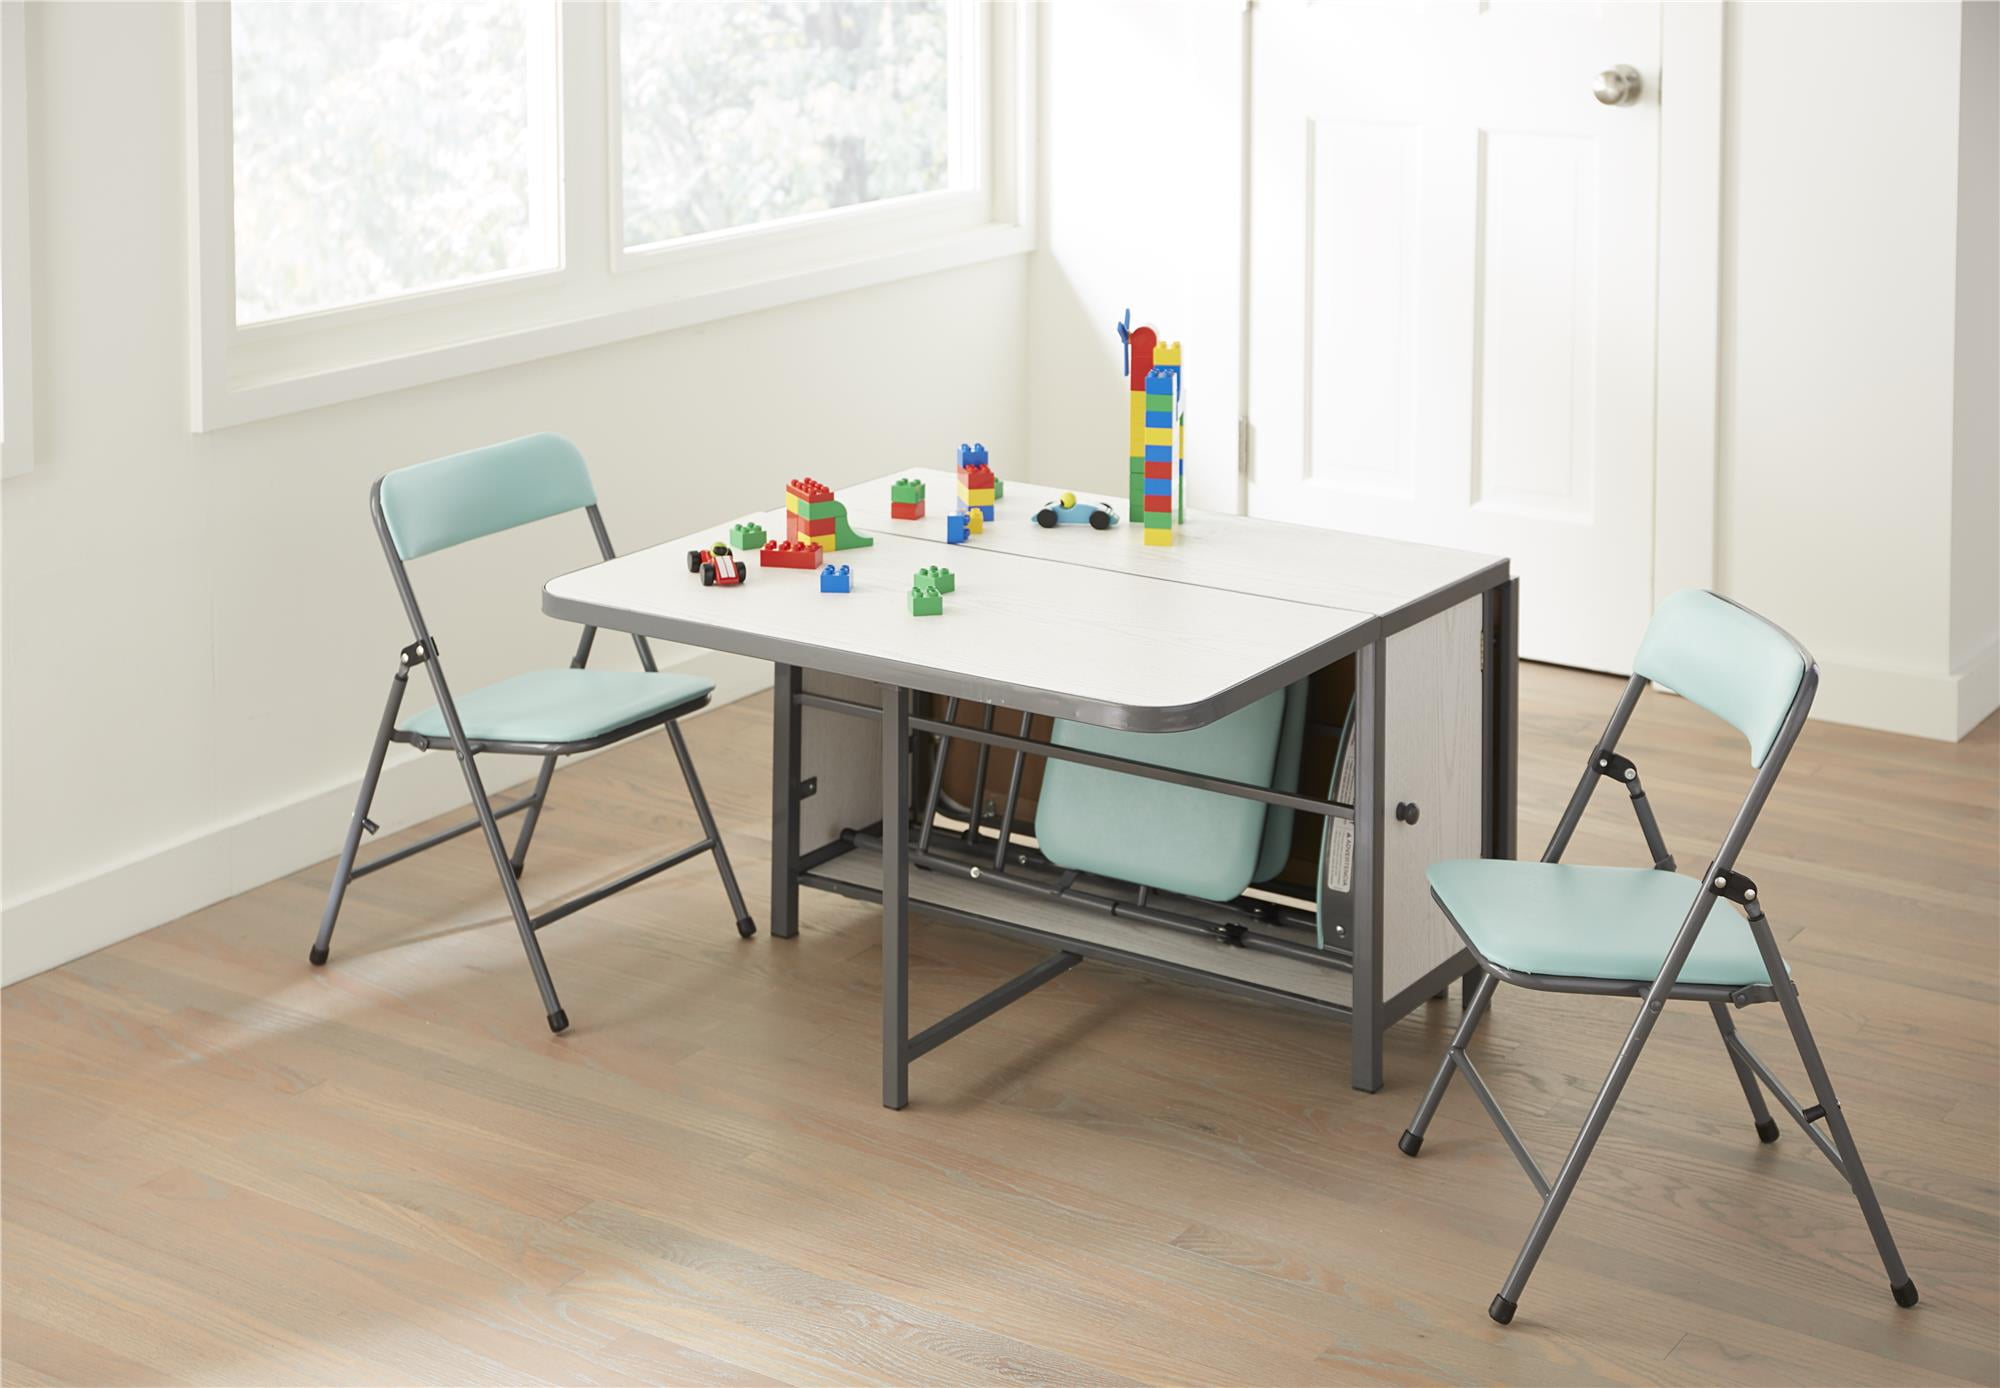 cosco kid's 5 piece folding chair and table set